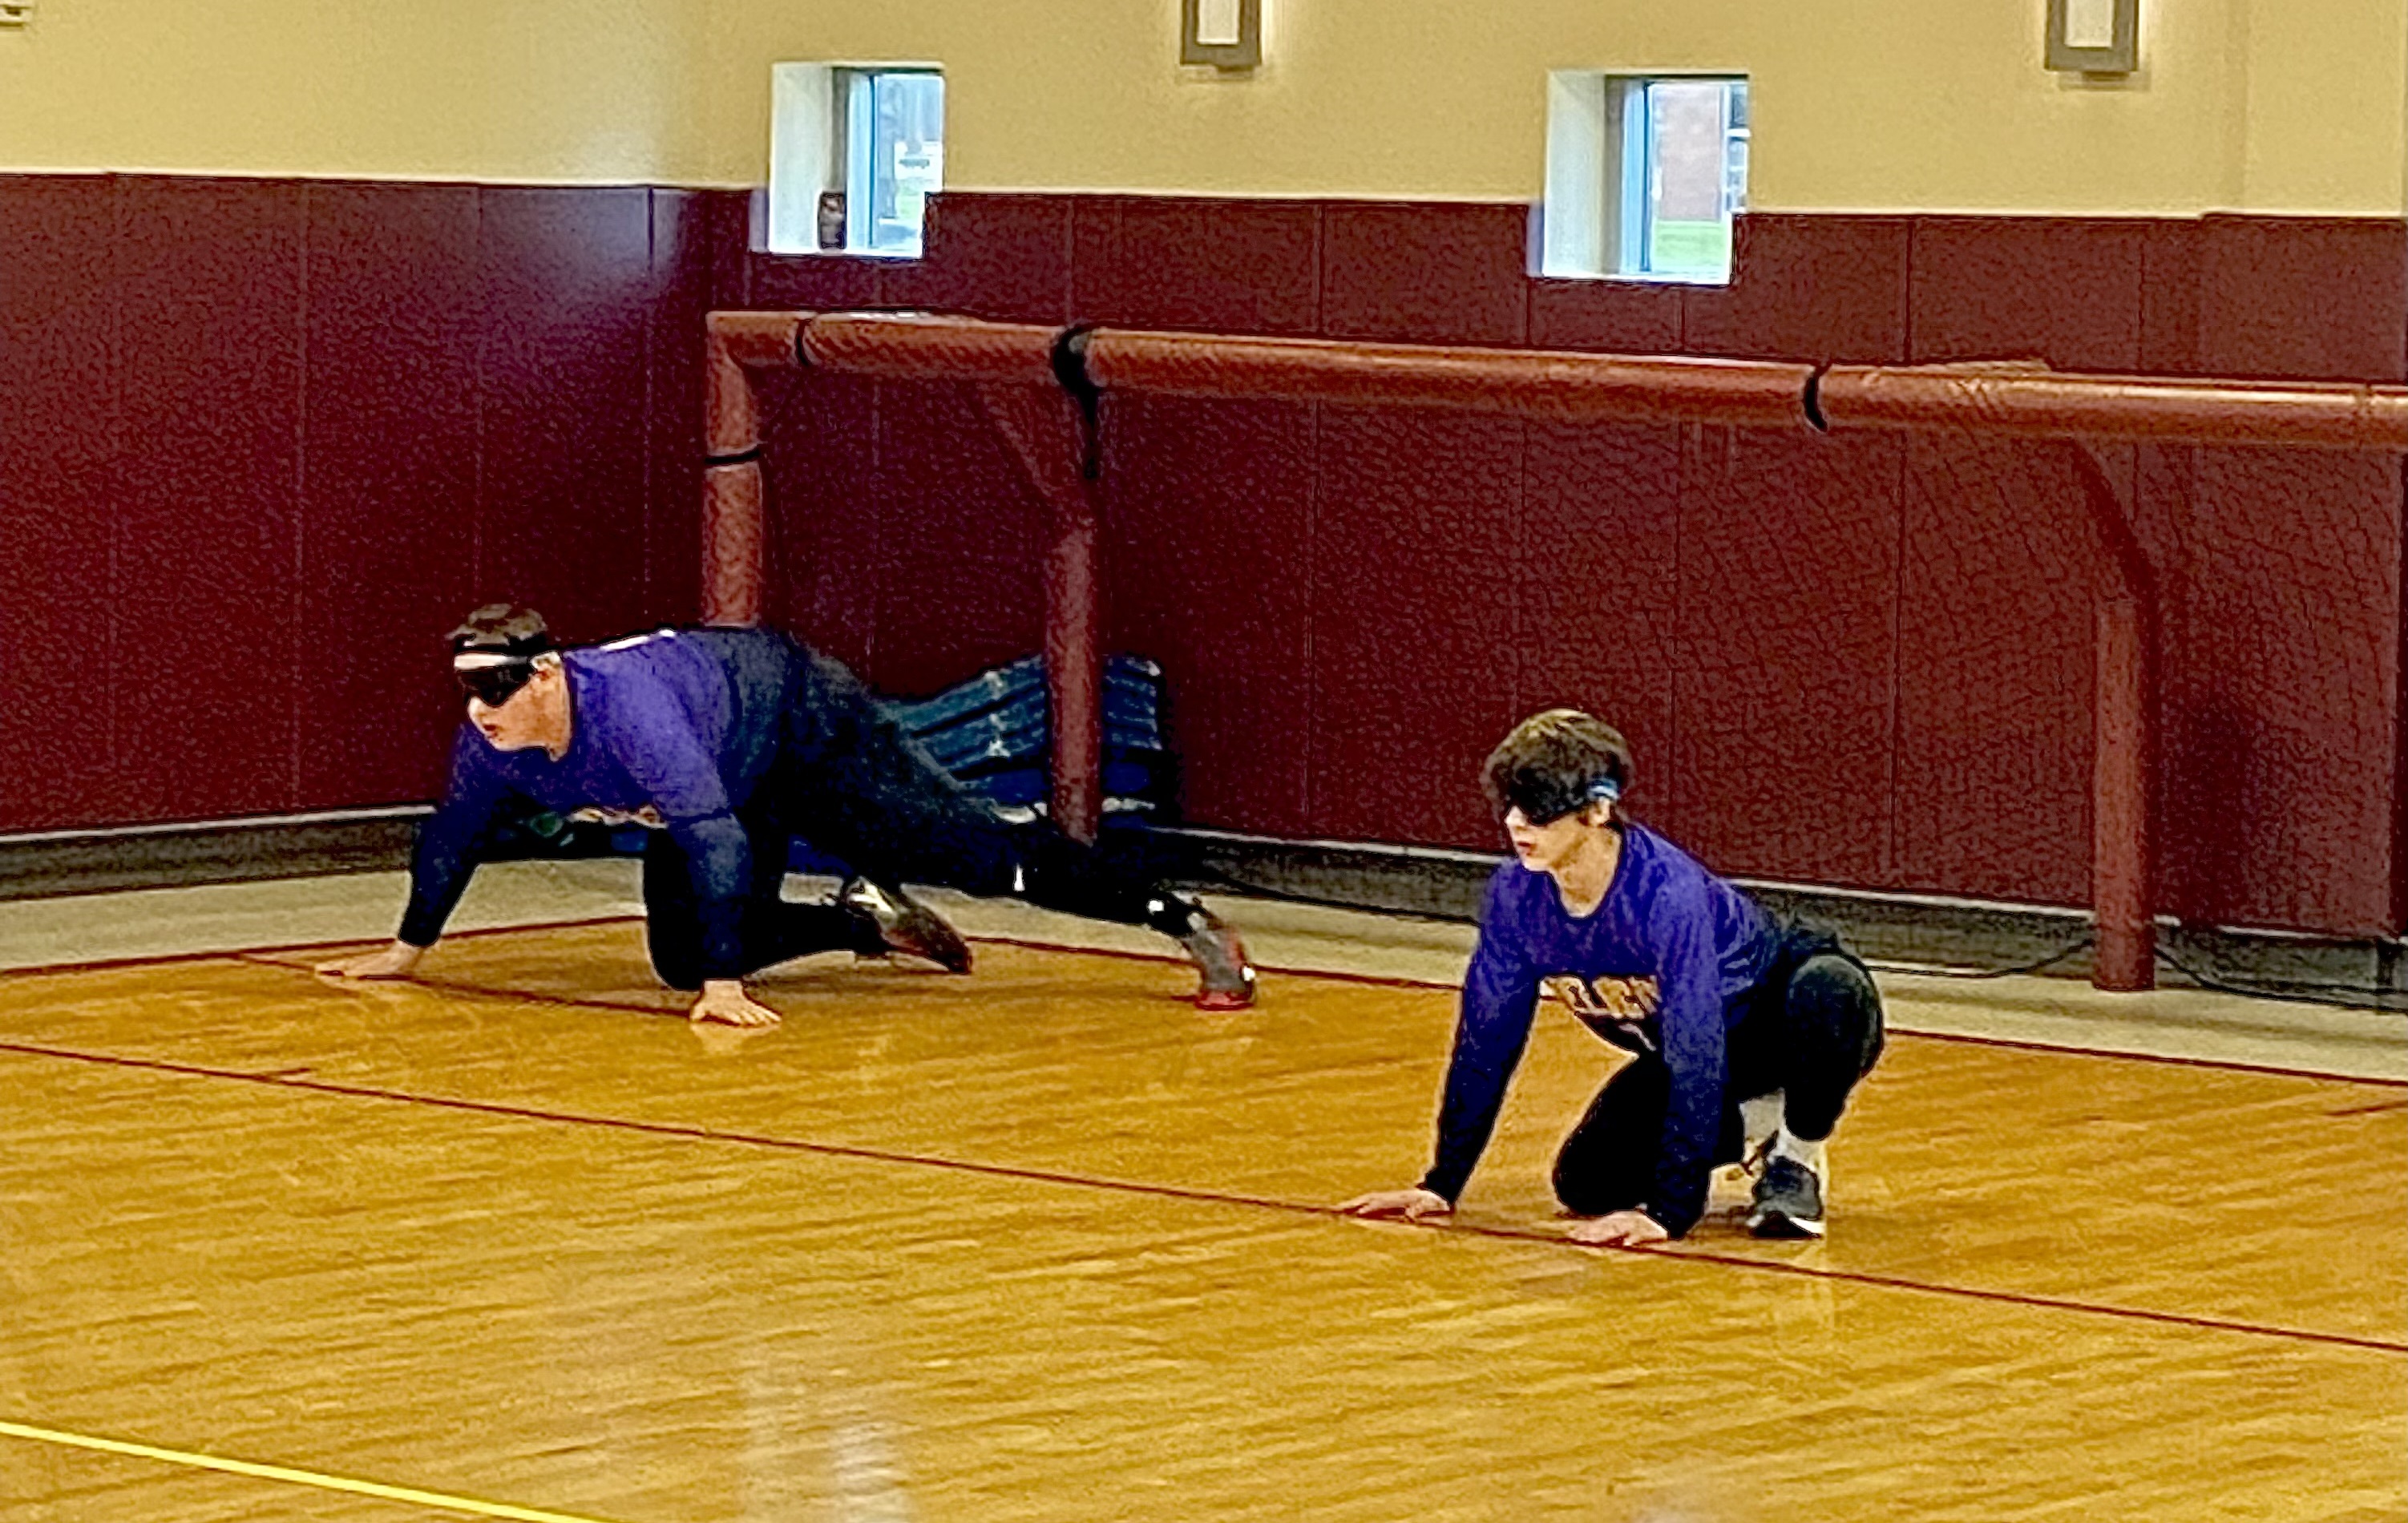 Two goalball players prepare to block a ball from going into the net.